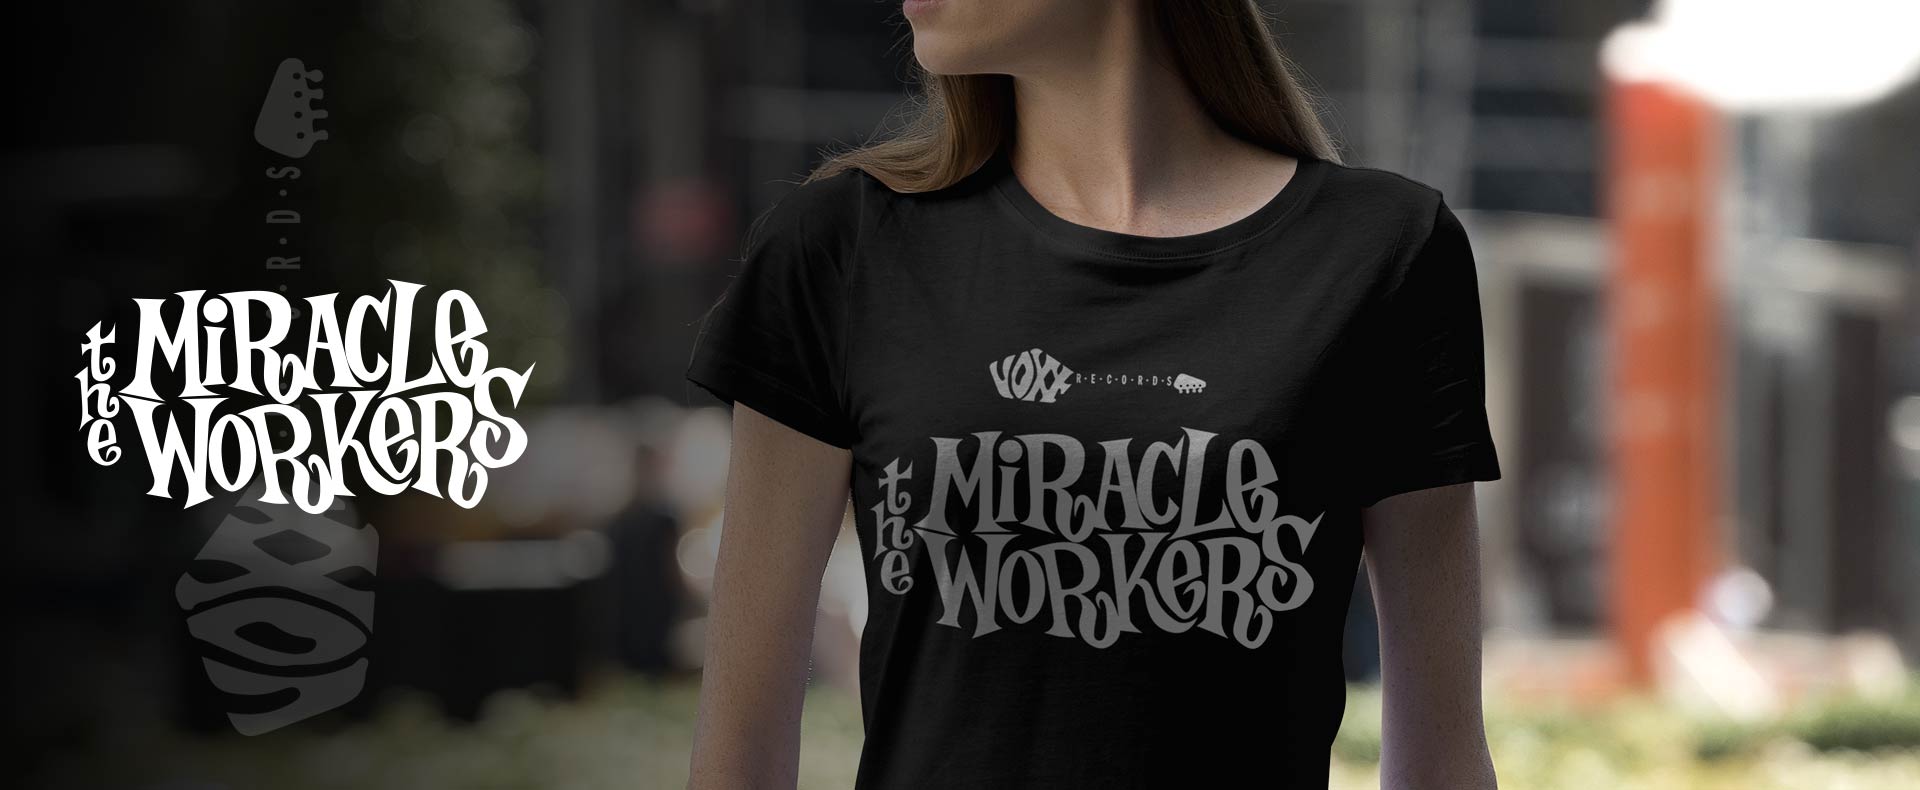 Miracle Workers for women